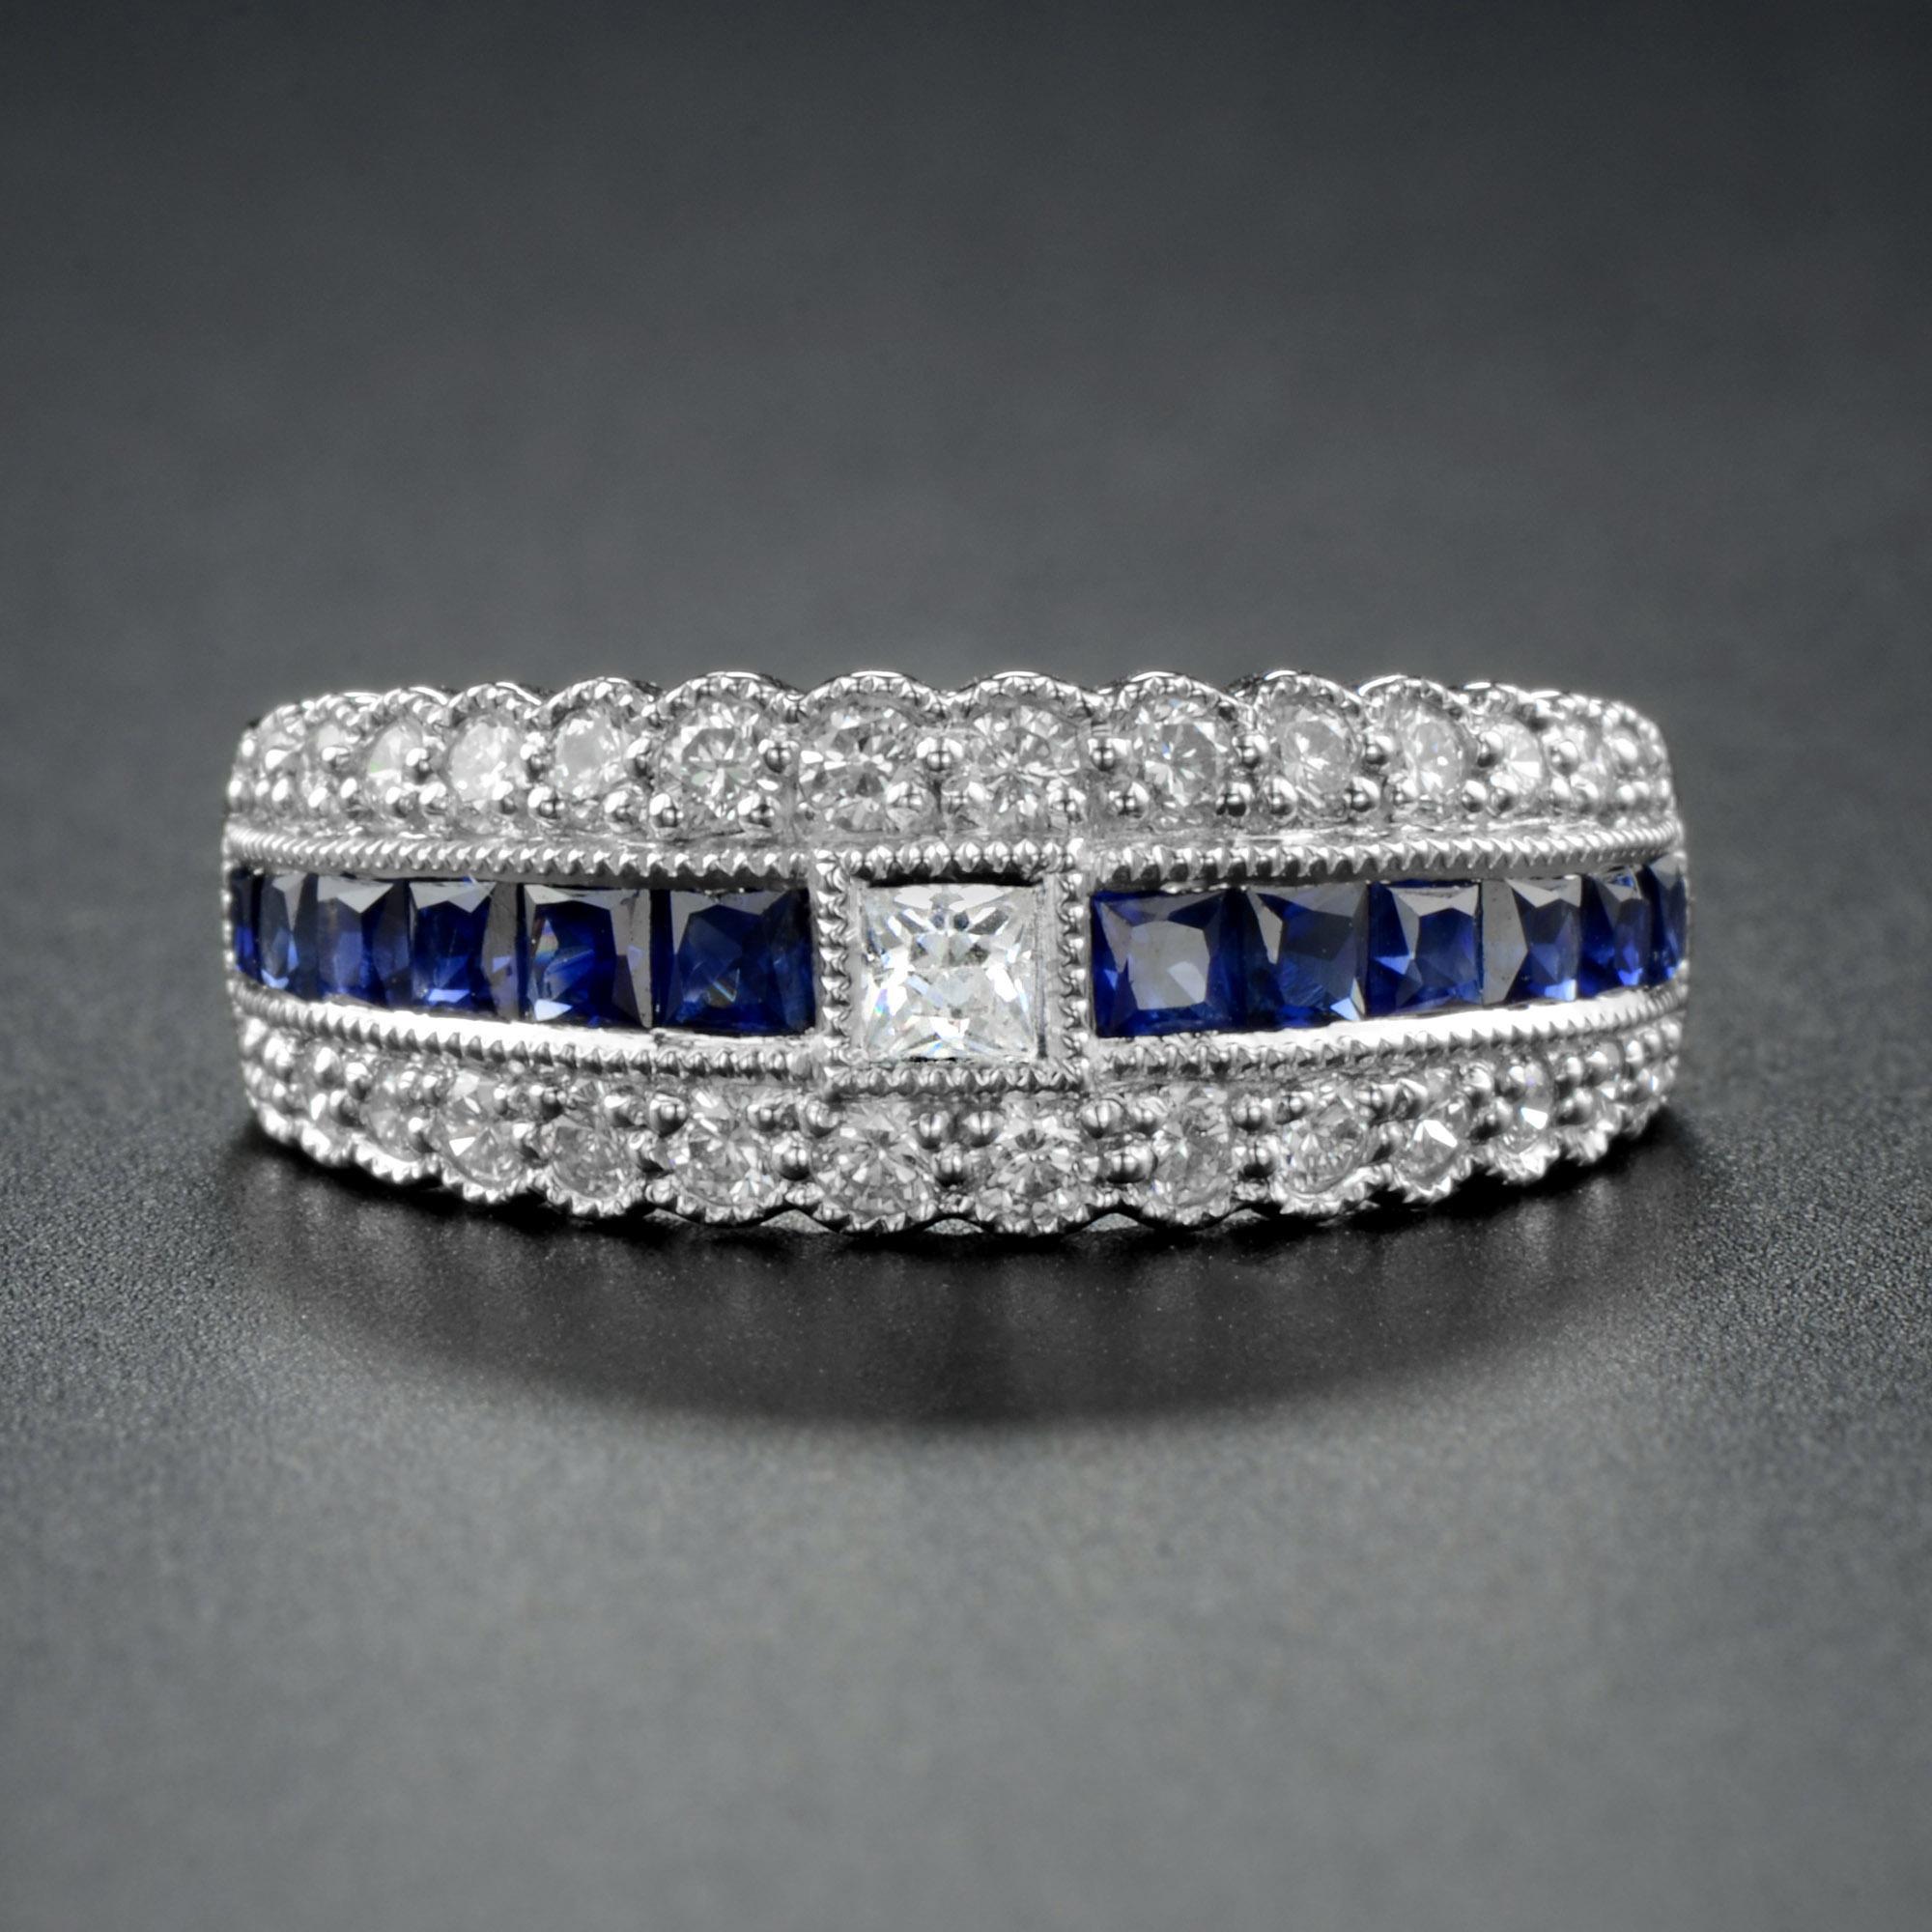 This absolutely superb example of the Art Deco design is a classy ring. A center diamond is accent by twelve French cut natural blue sapphire on east and west of this striking half eternity ring, with two further bands of white diamonds either side.